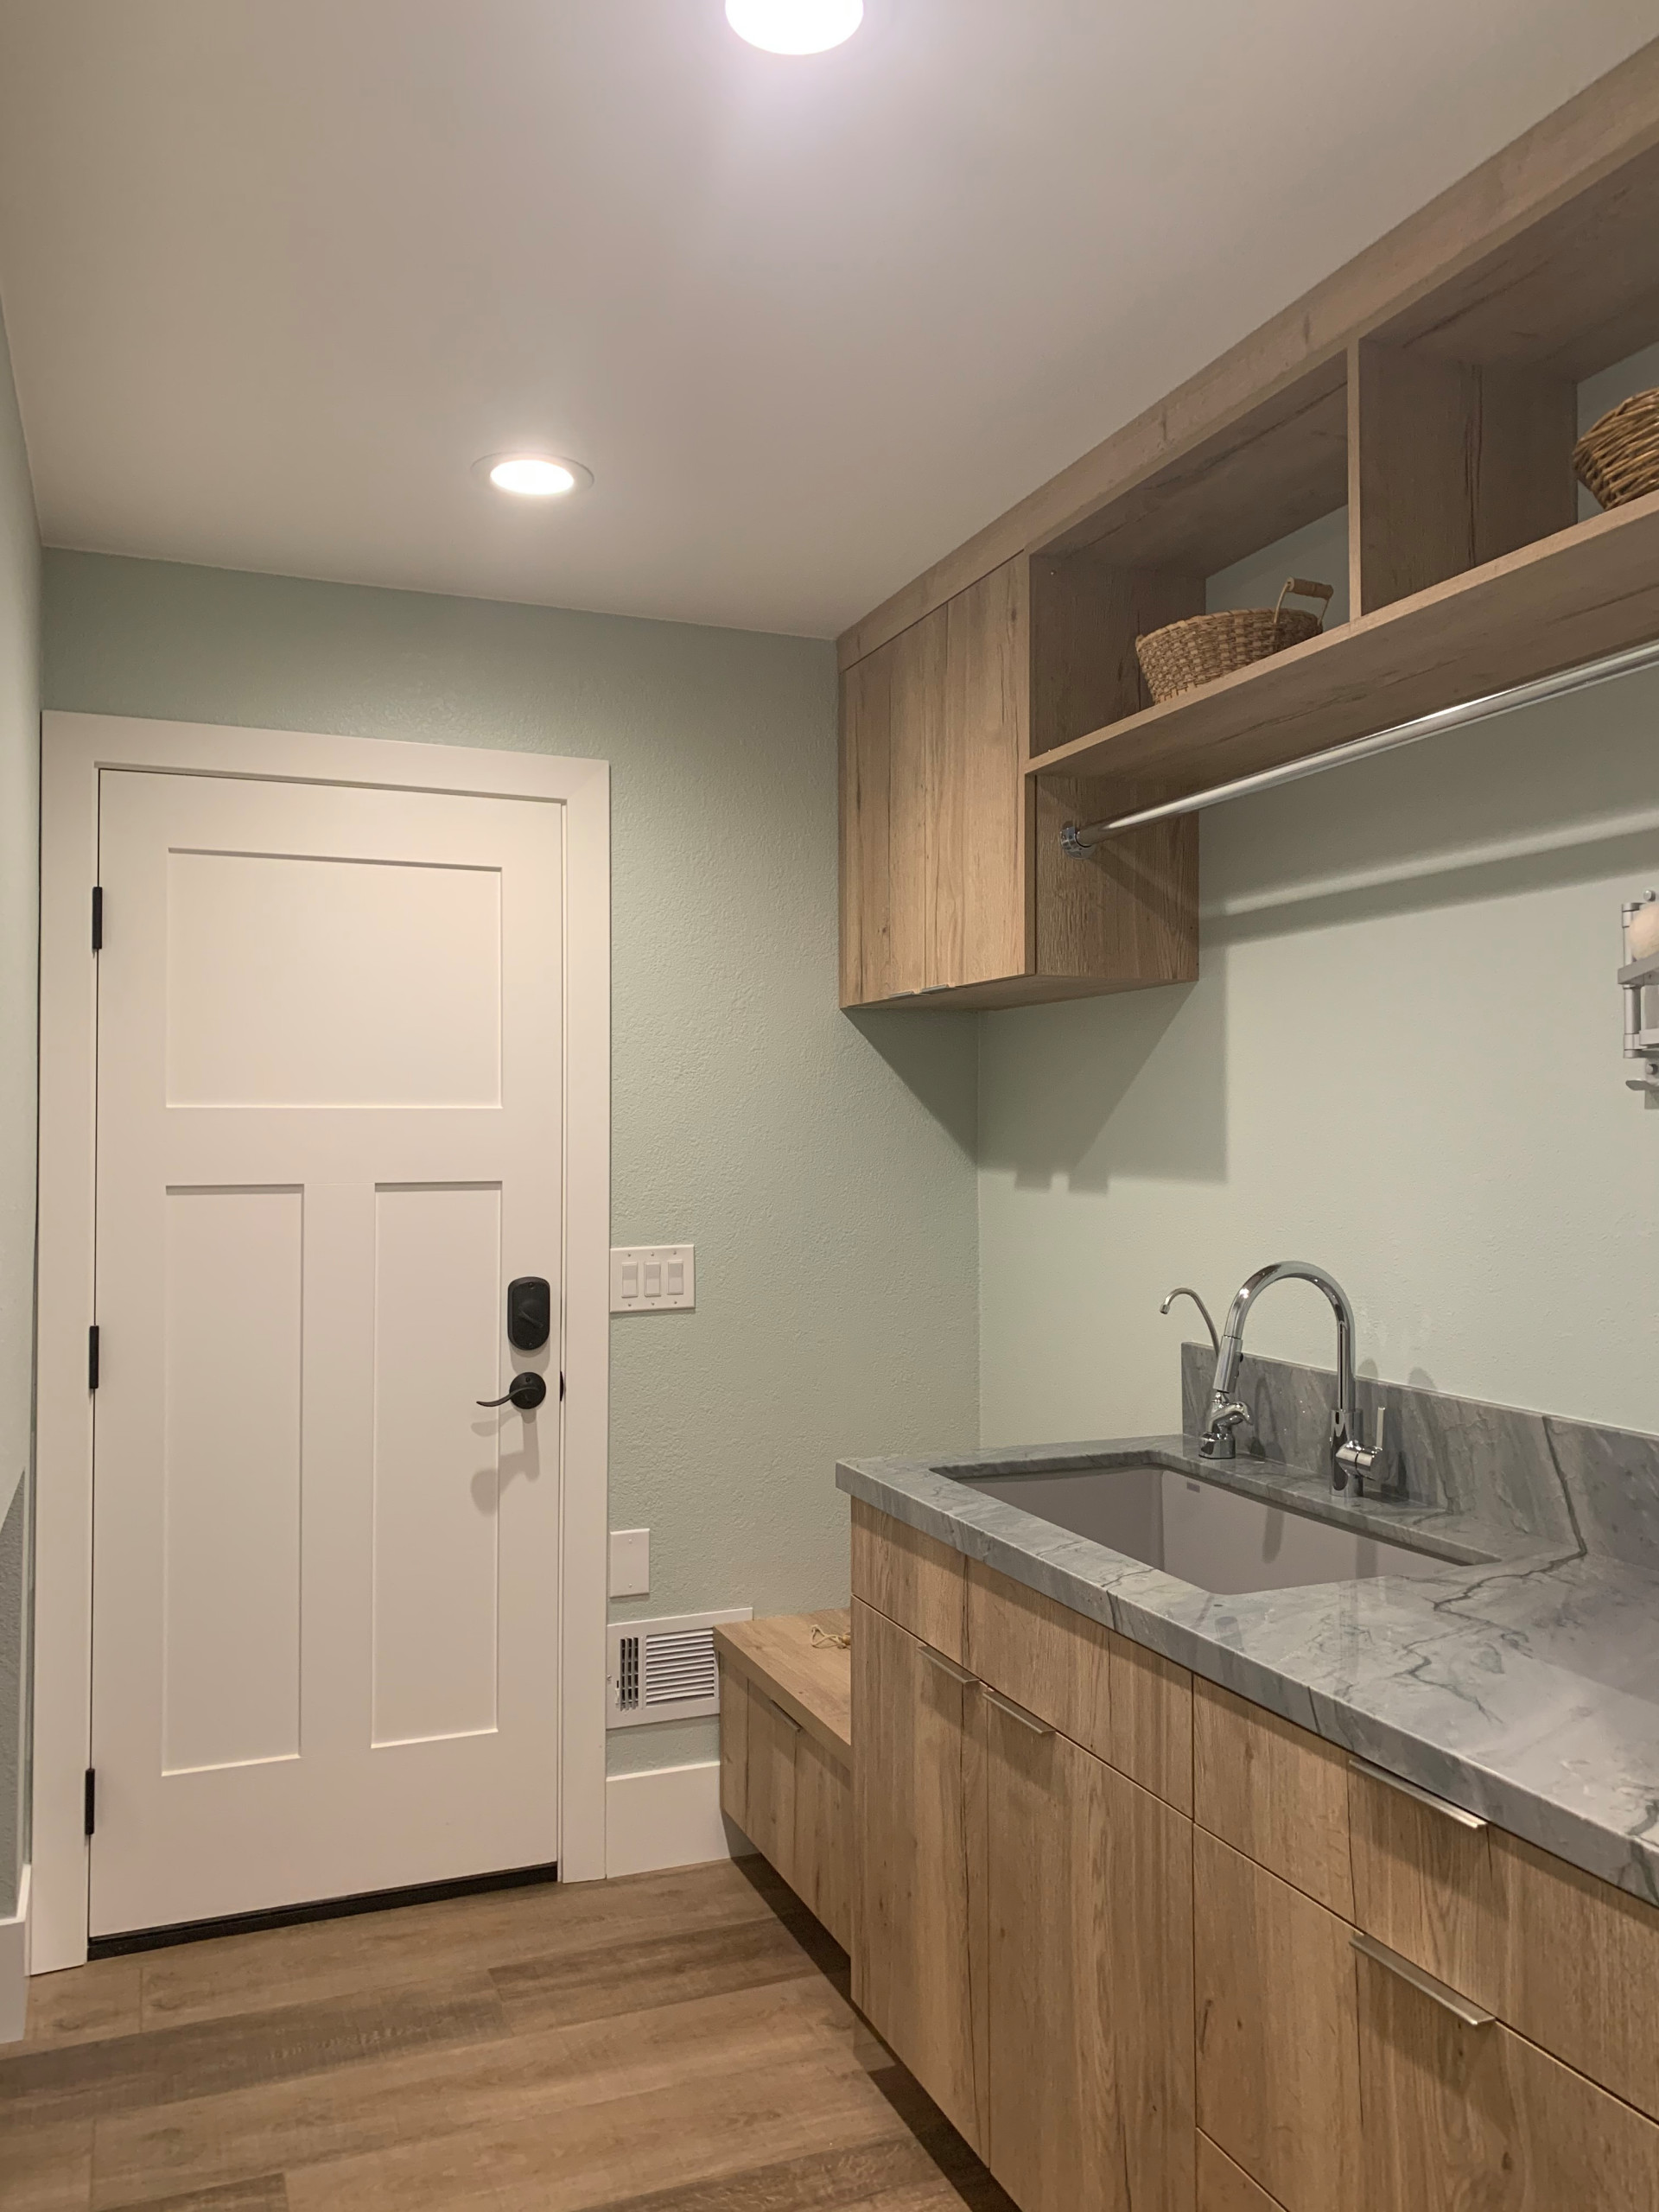 MUDROOM/LAUNDRY-Super functional, lots of storage, bench & deep sink